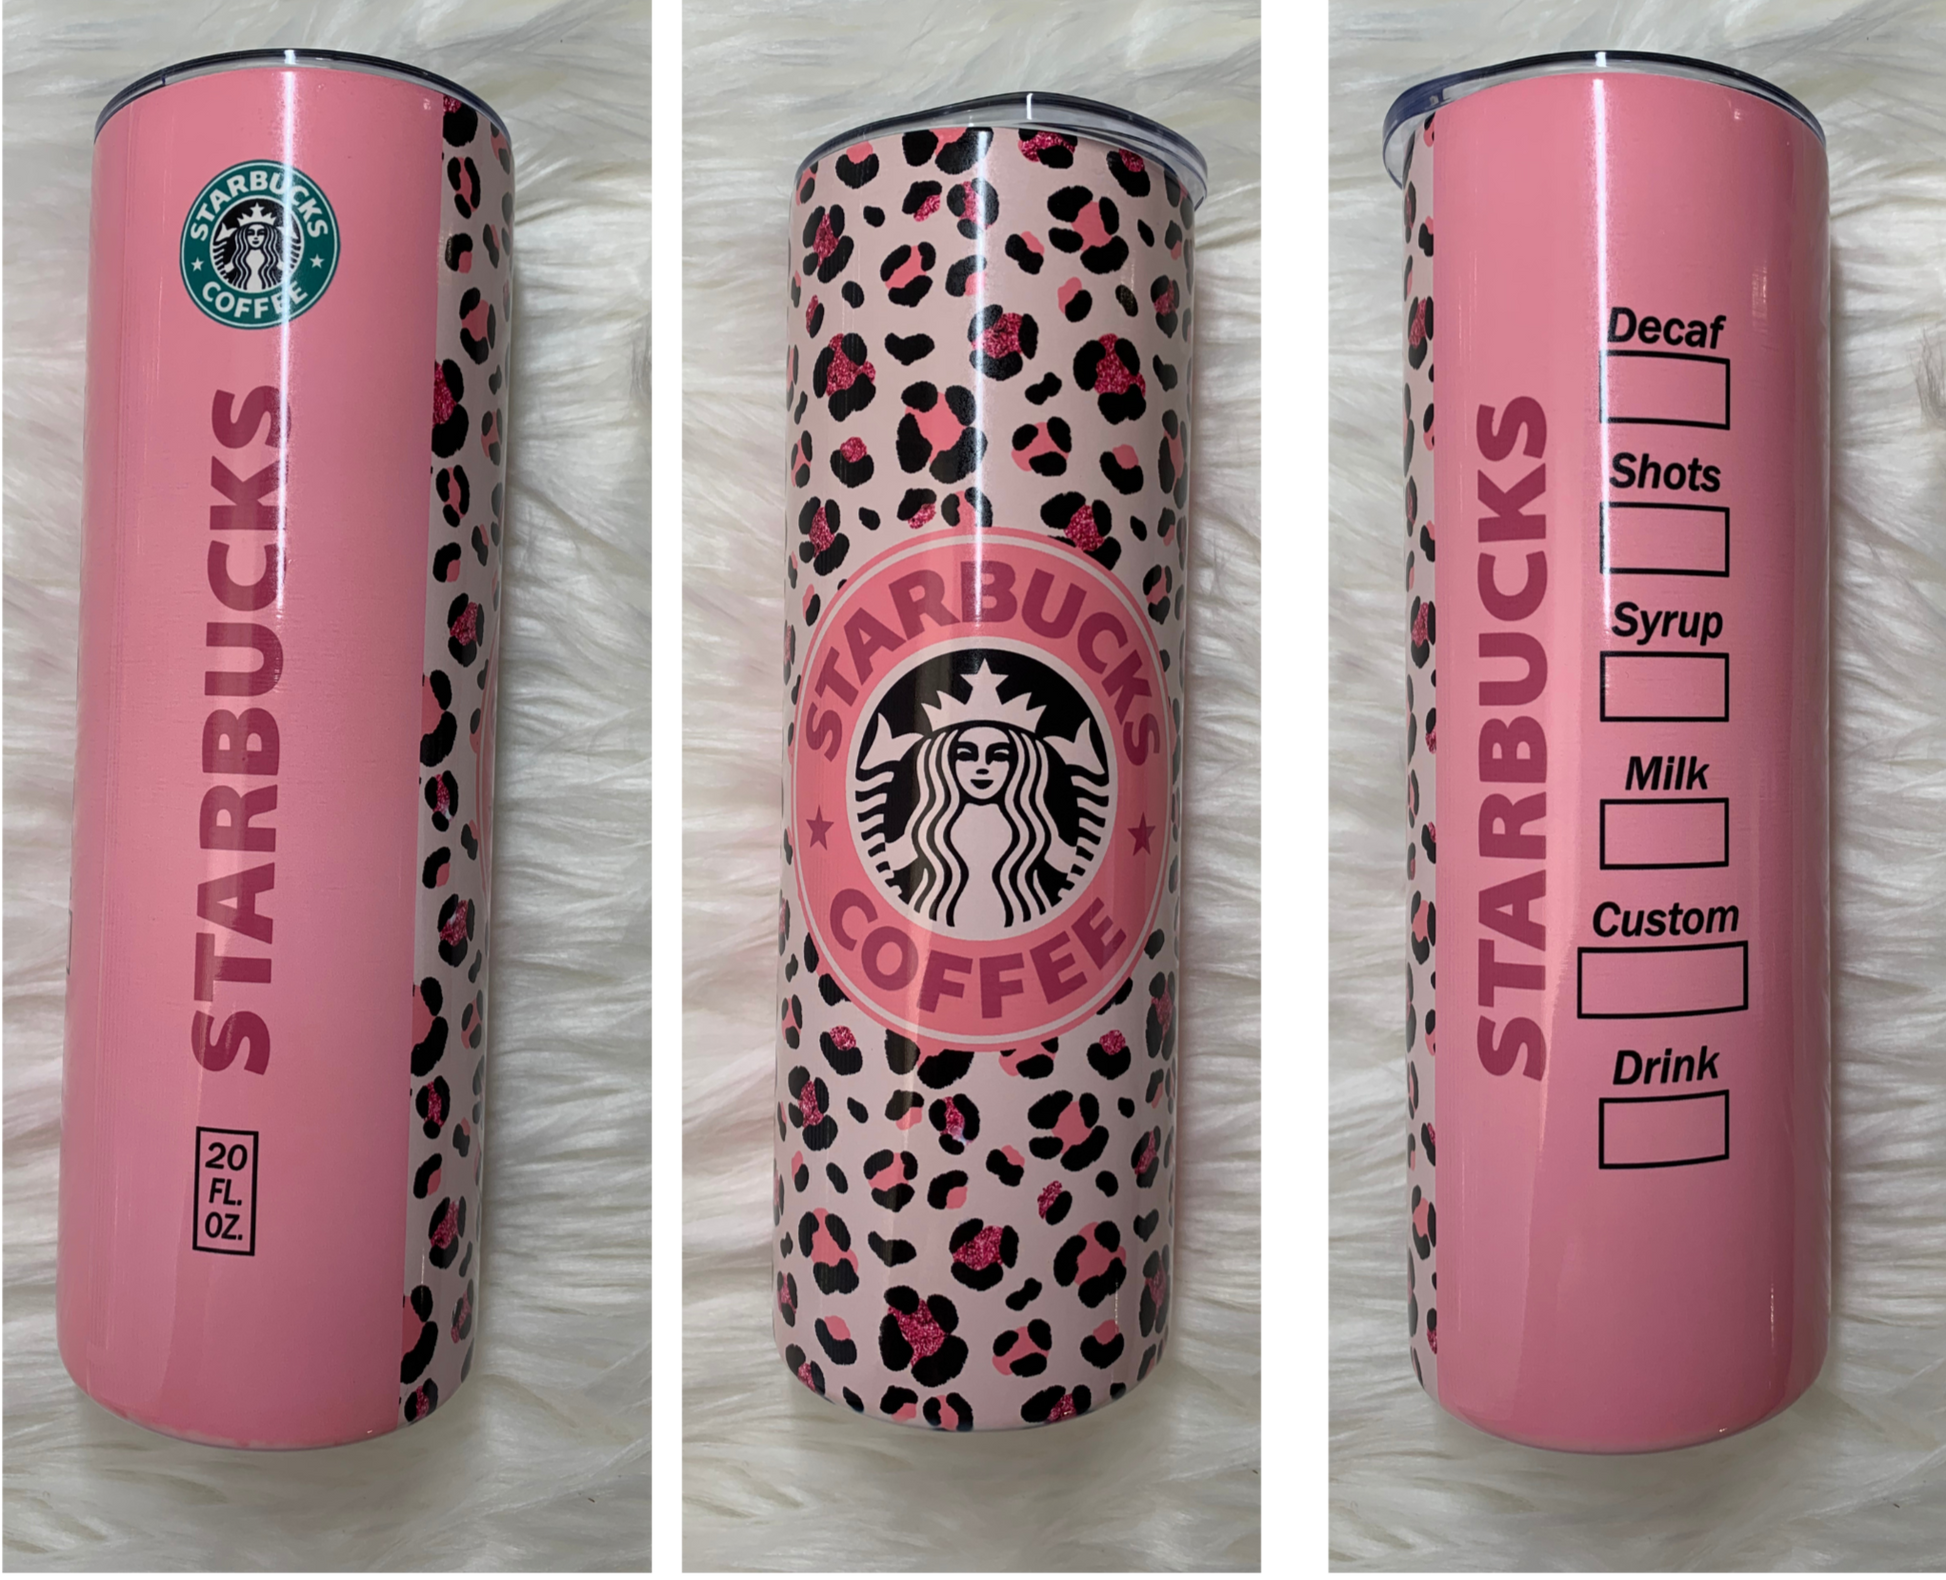 Pink Starbucks 20 oz Stainless Steel Double wall tumbler